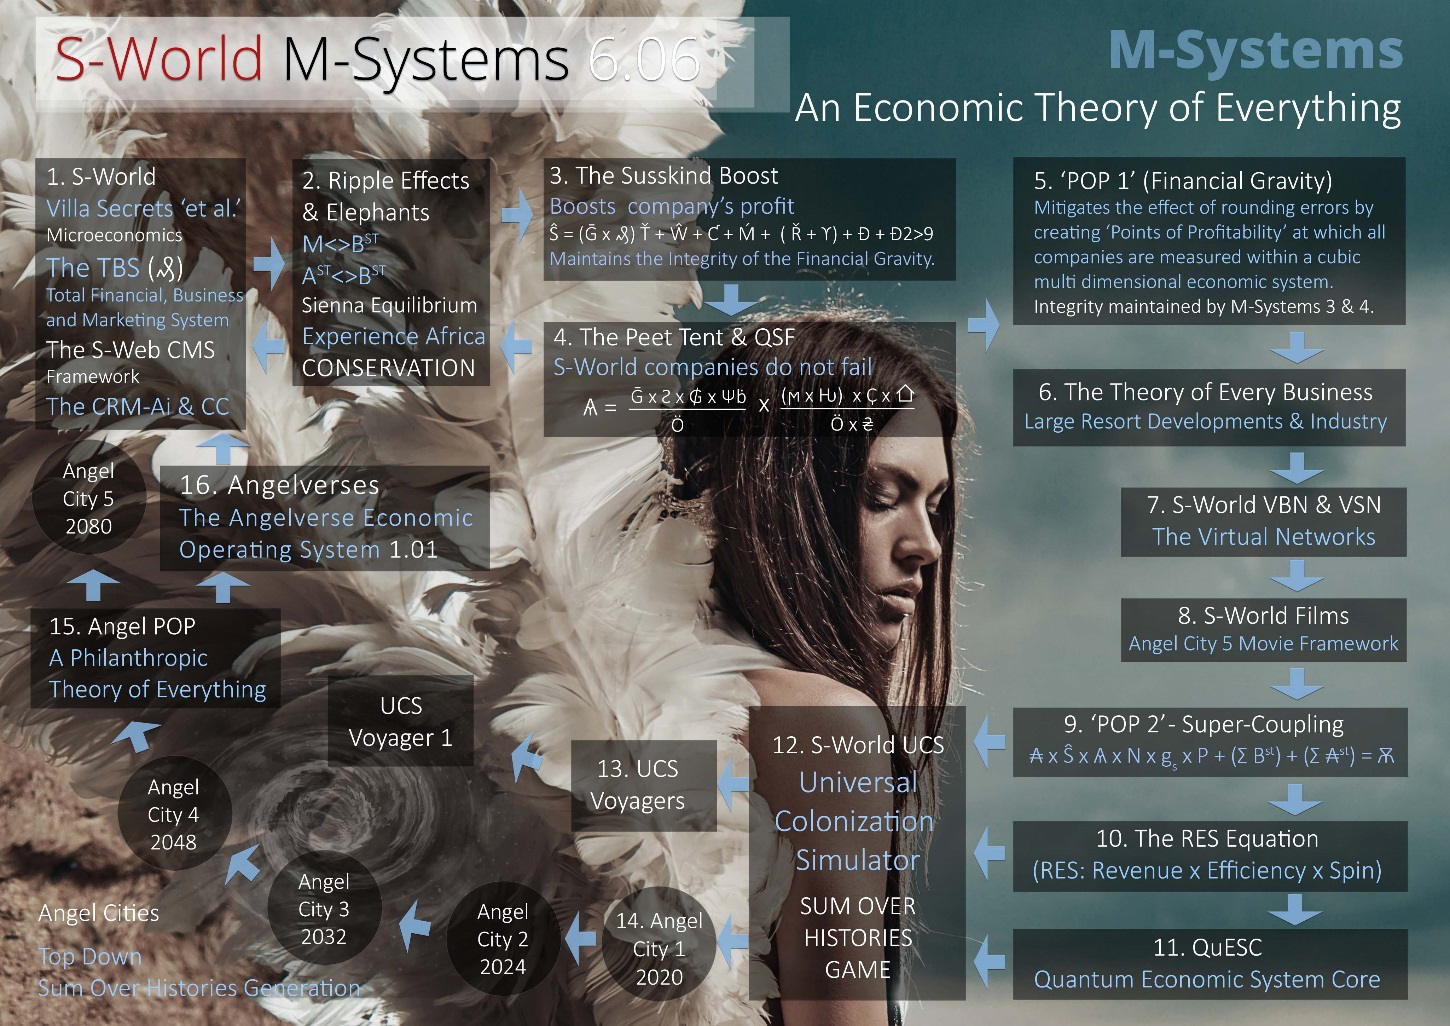 S-World-M-Systems (An Economic Theory of Everything)